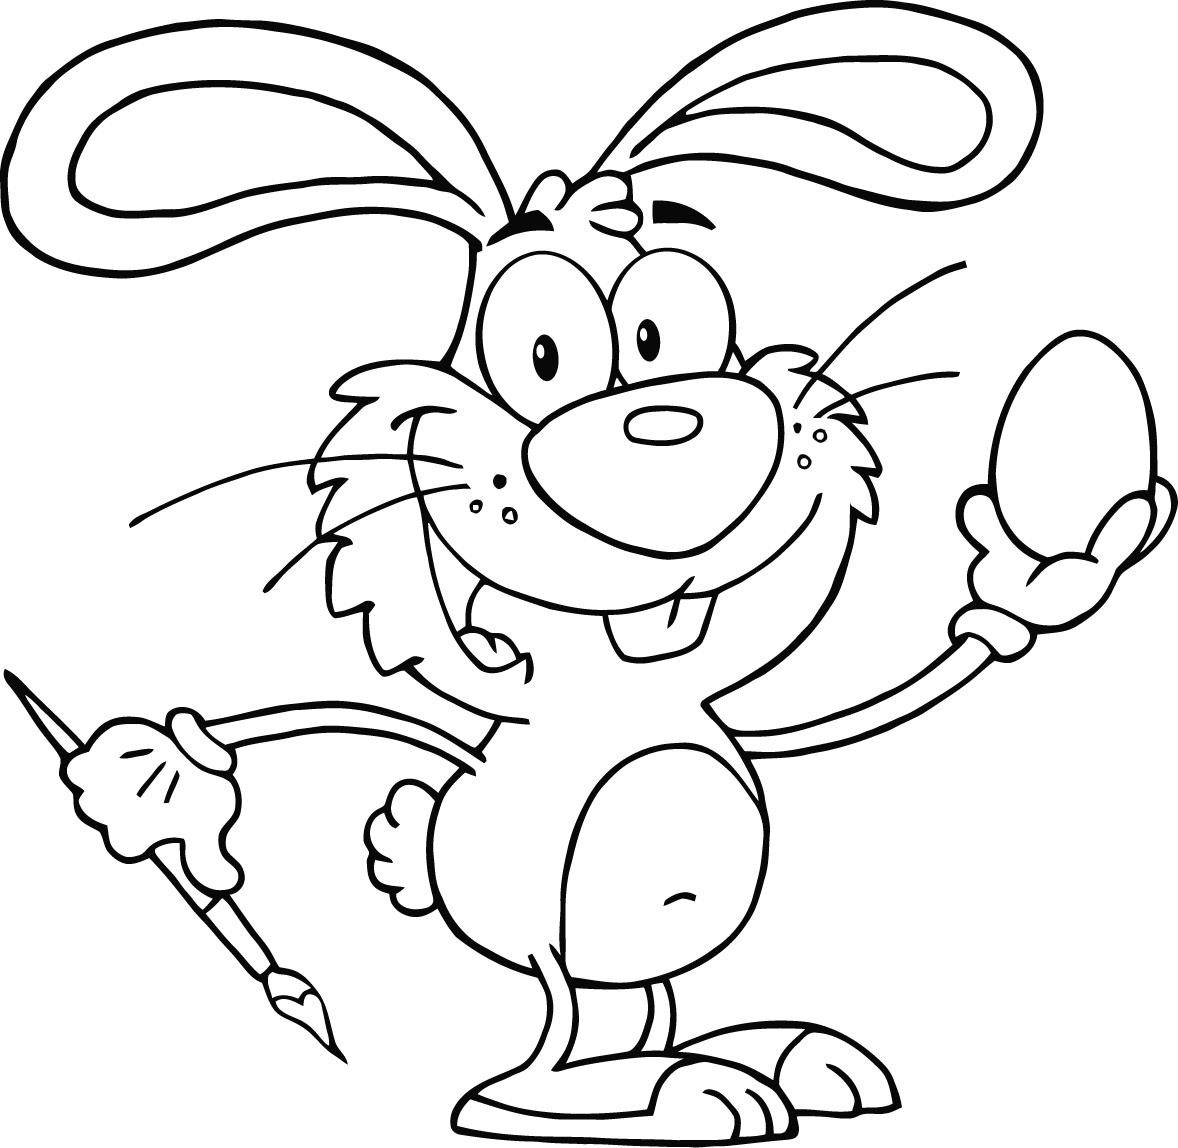 Bunnies Coloring Pages
 Bunny Coloring Pages Best Coloring Pages For Kids